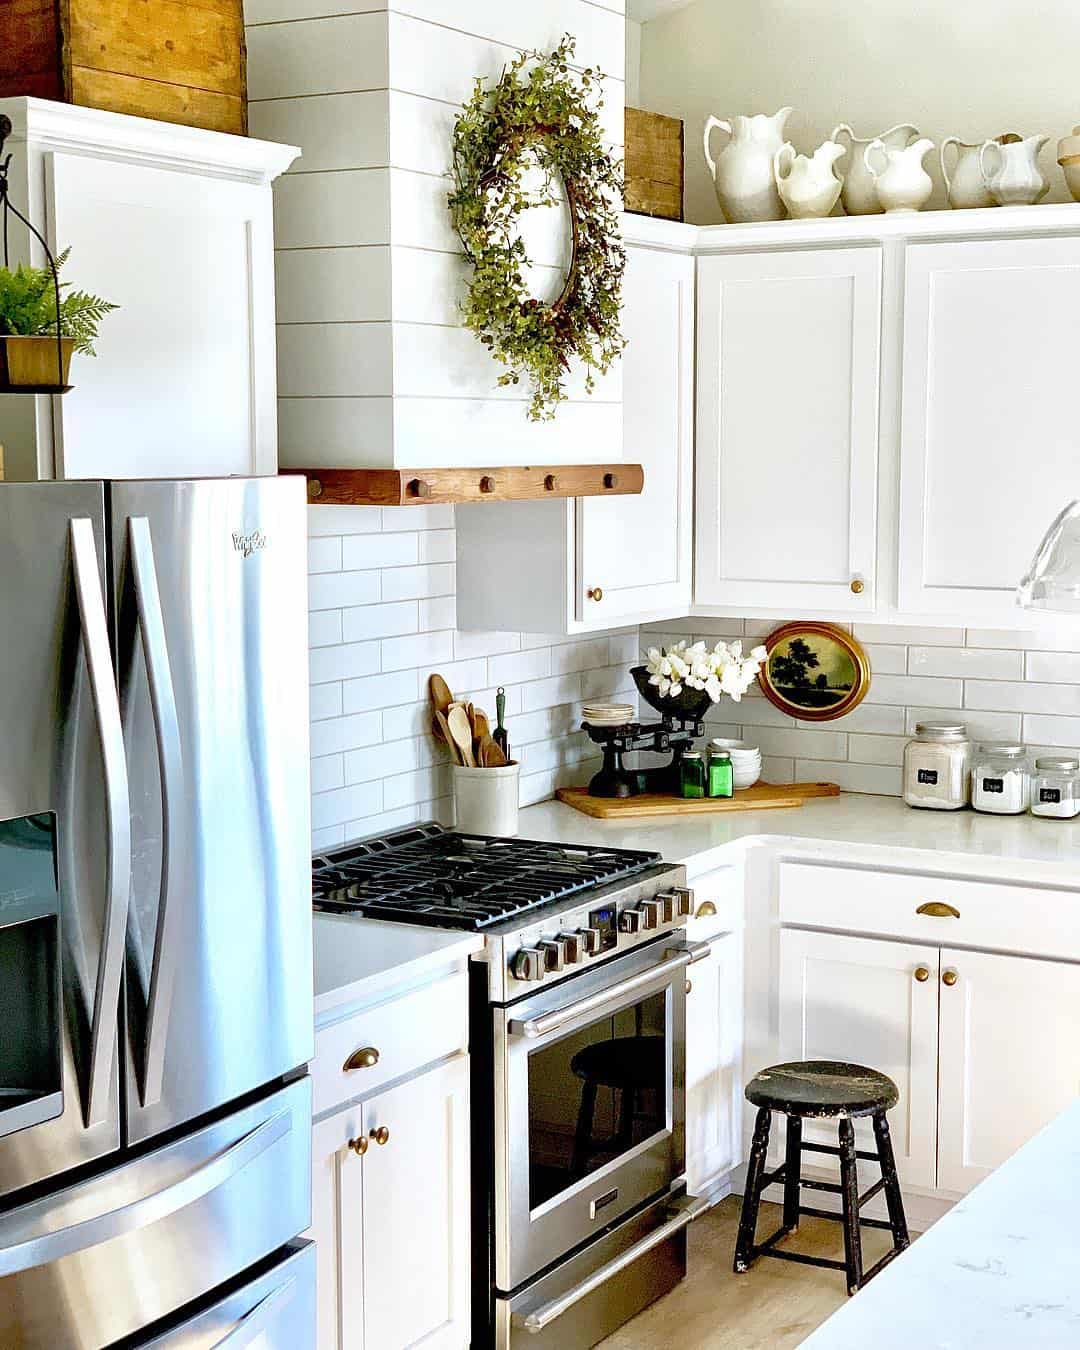 Whimsical Counter Decorations in a White Kitchen